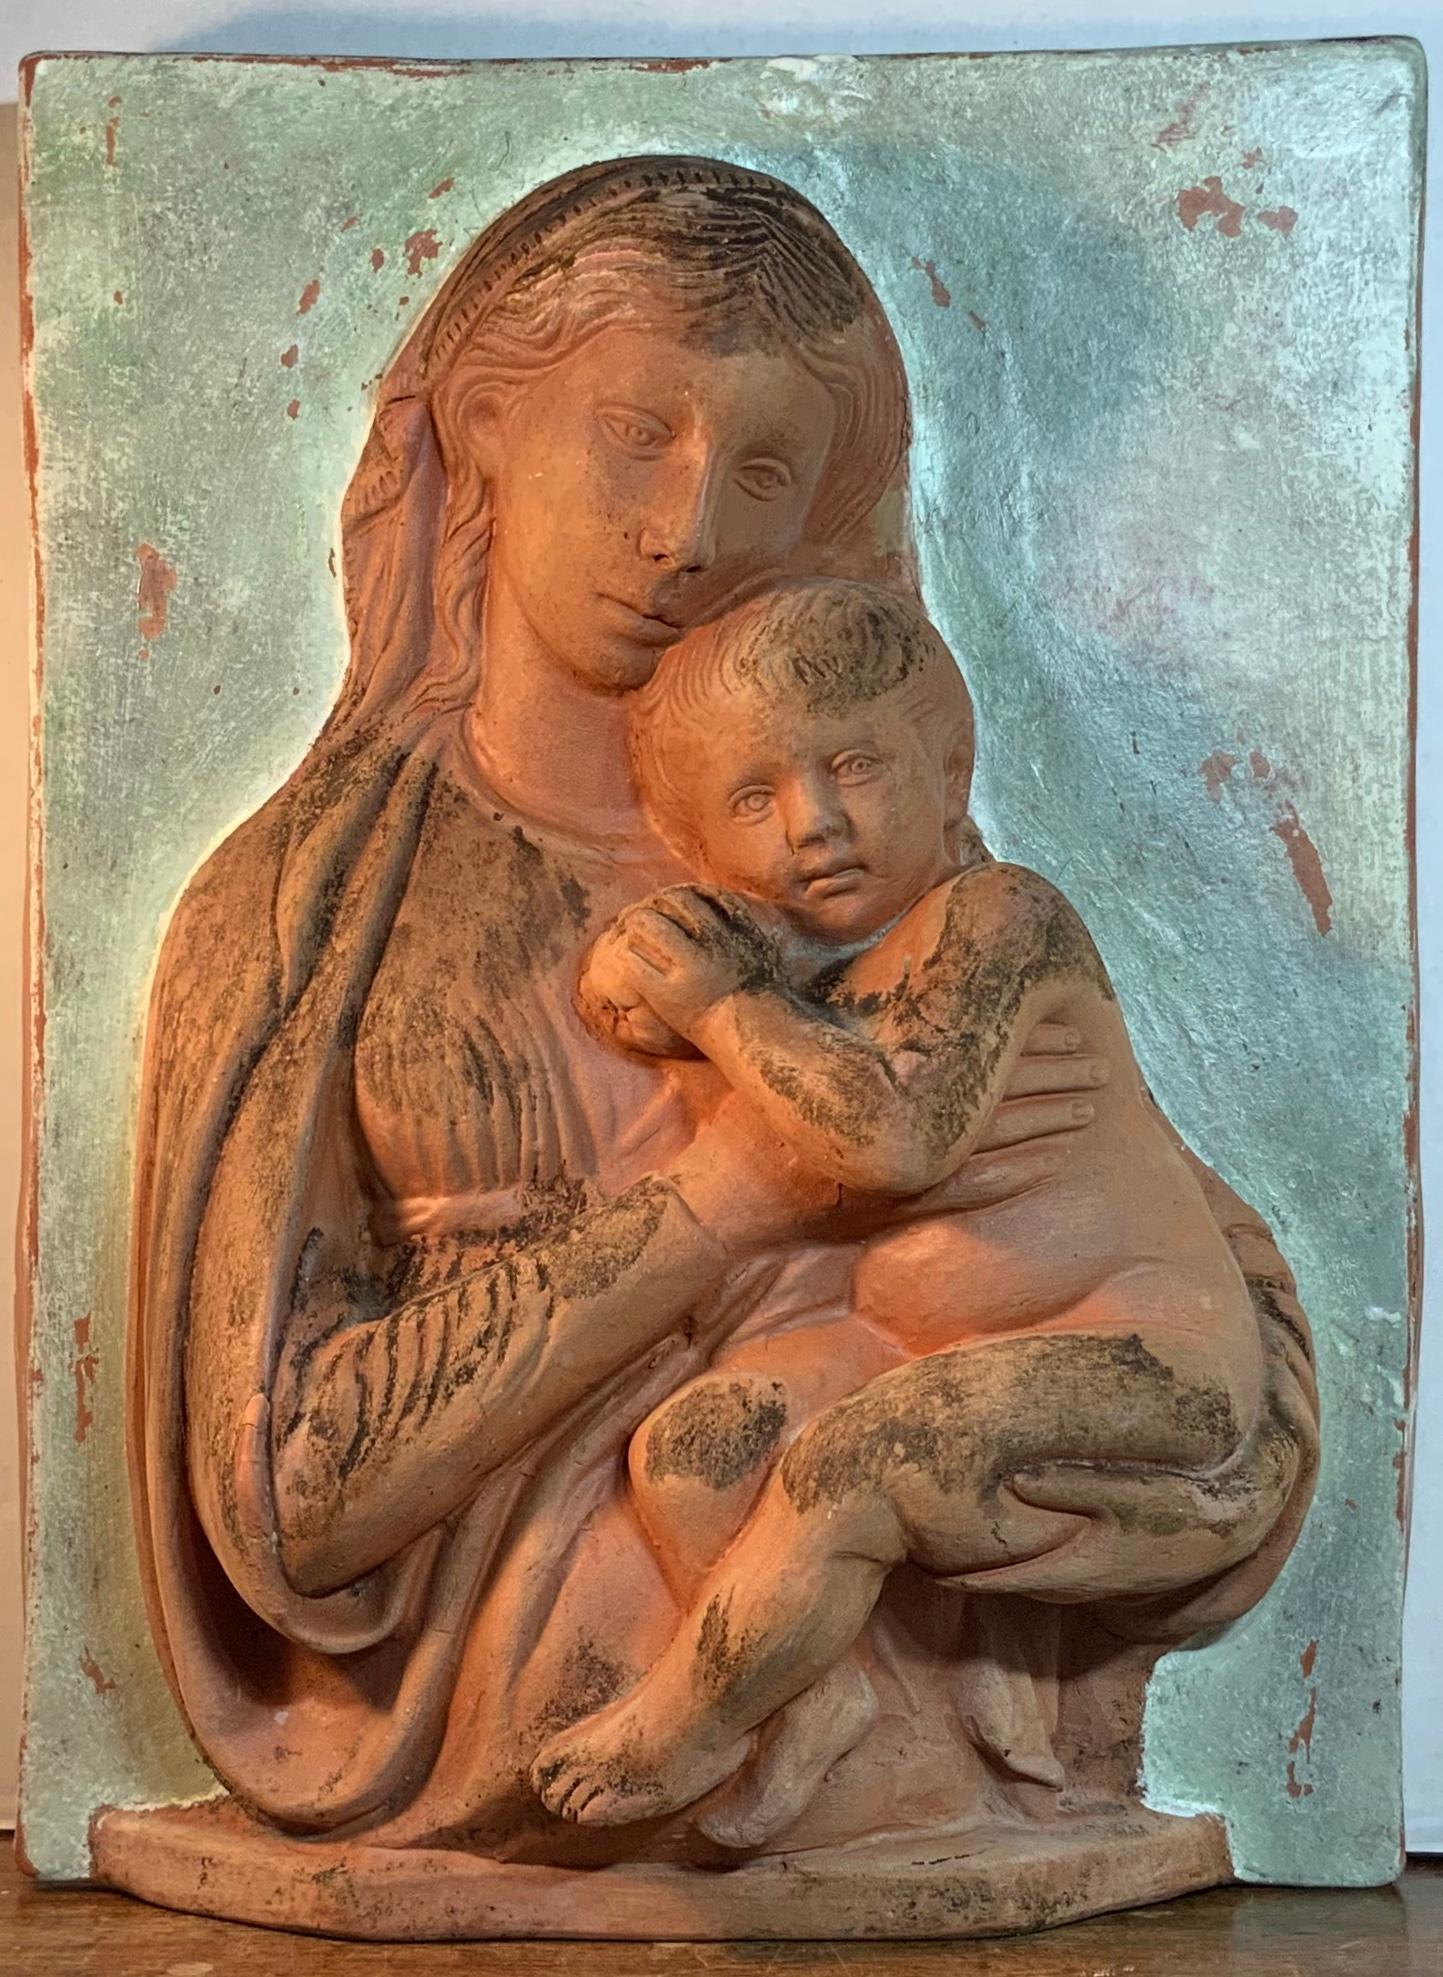 Beautiful sculpture made of terracotta, of mother and her child, hand painted background
and weathered patina, could hang on the wall indoor or outdoor or just could stand by itself over the fireplace.
Great object of art for display.